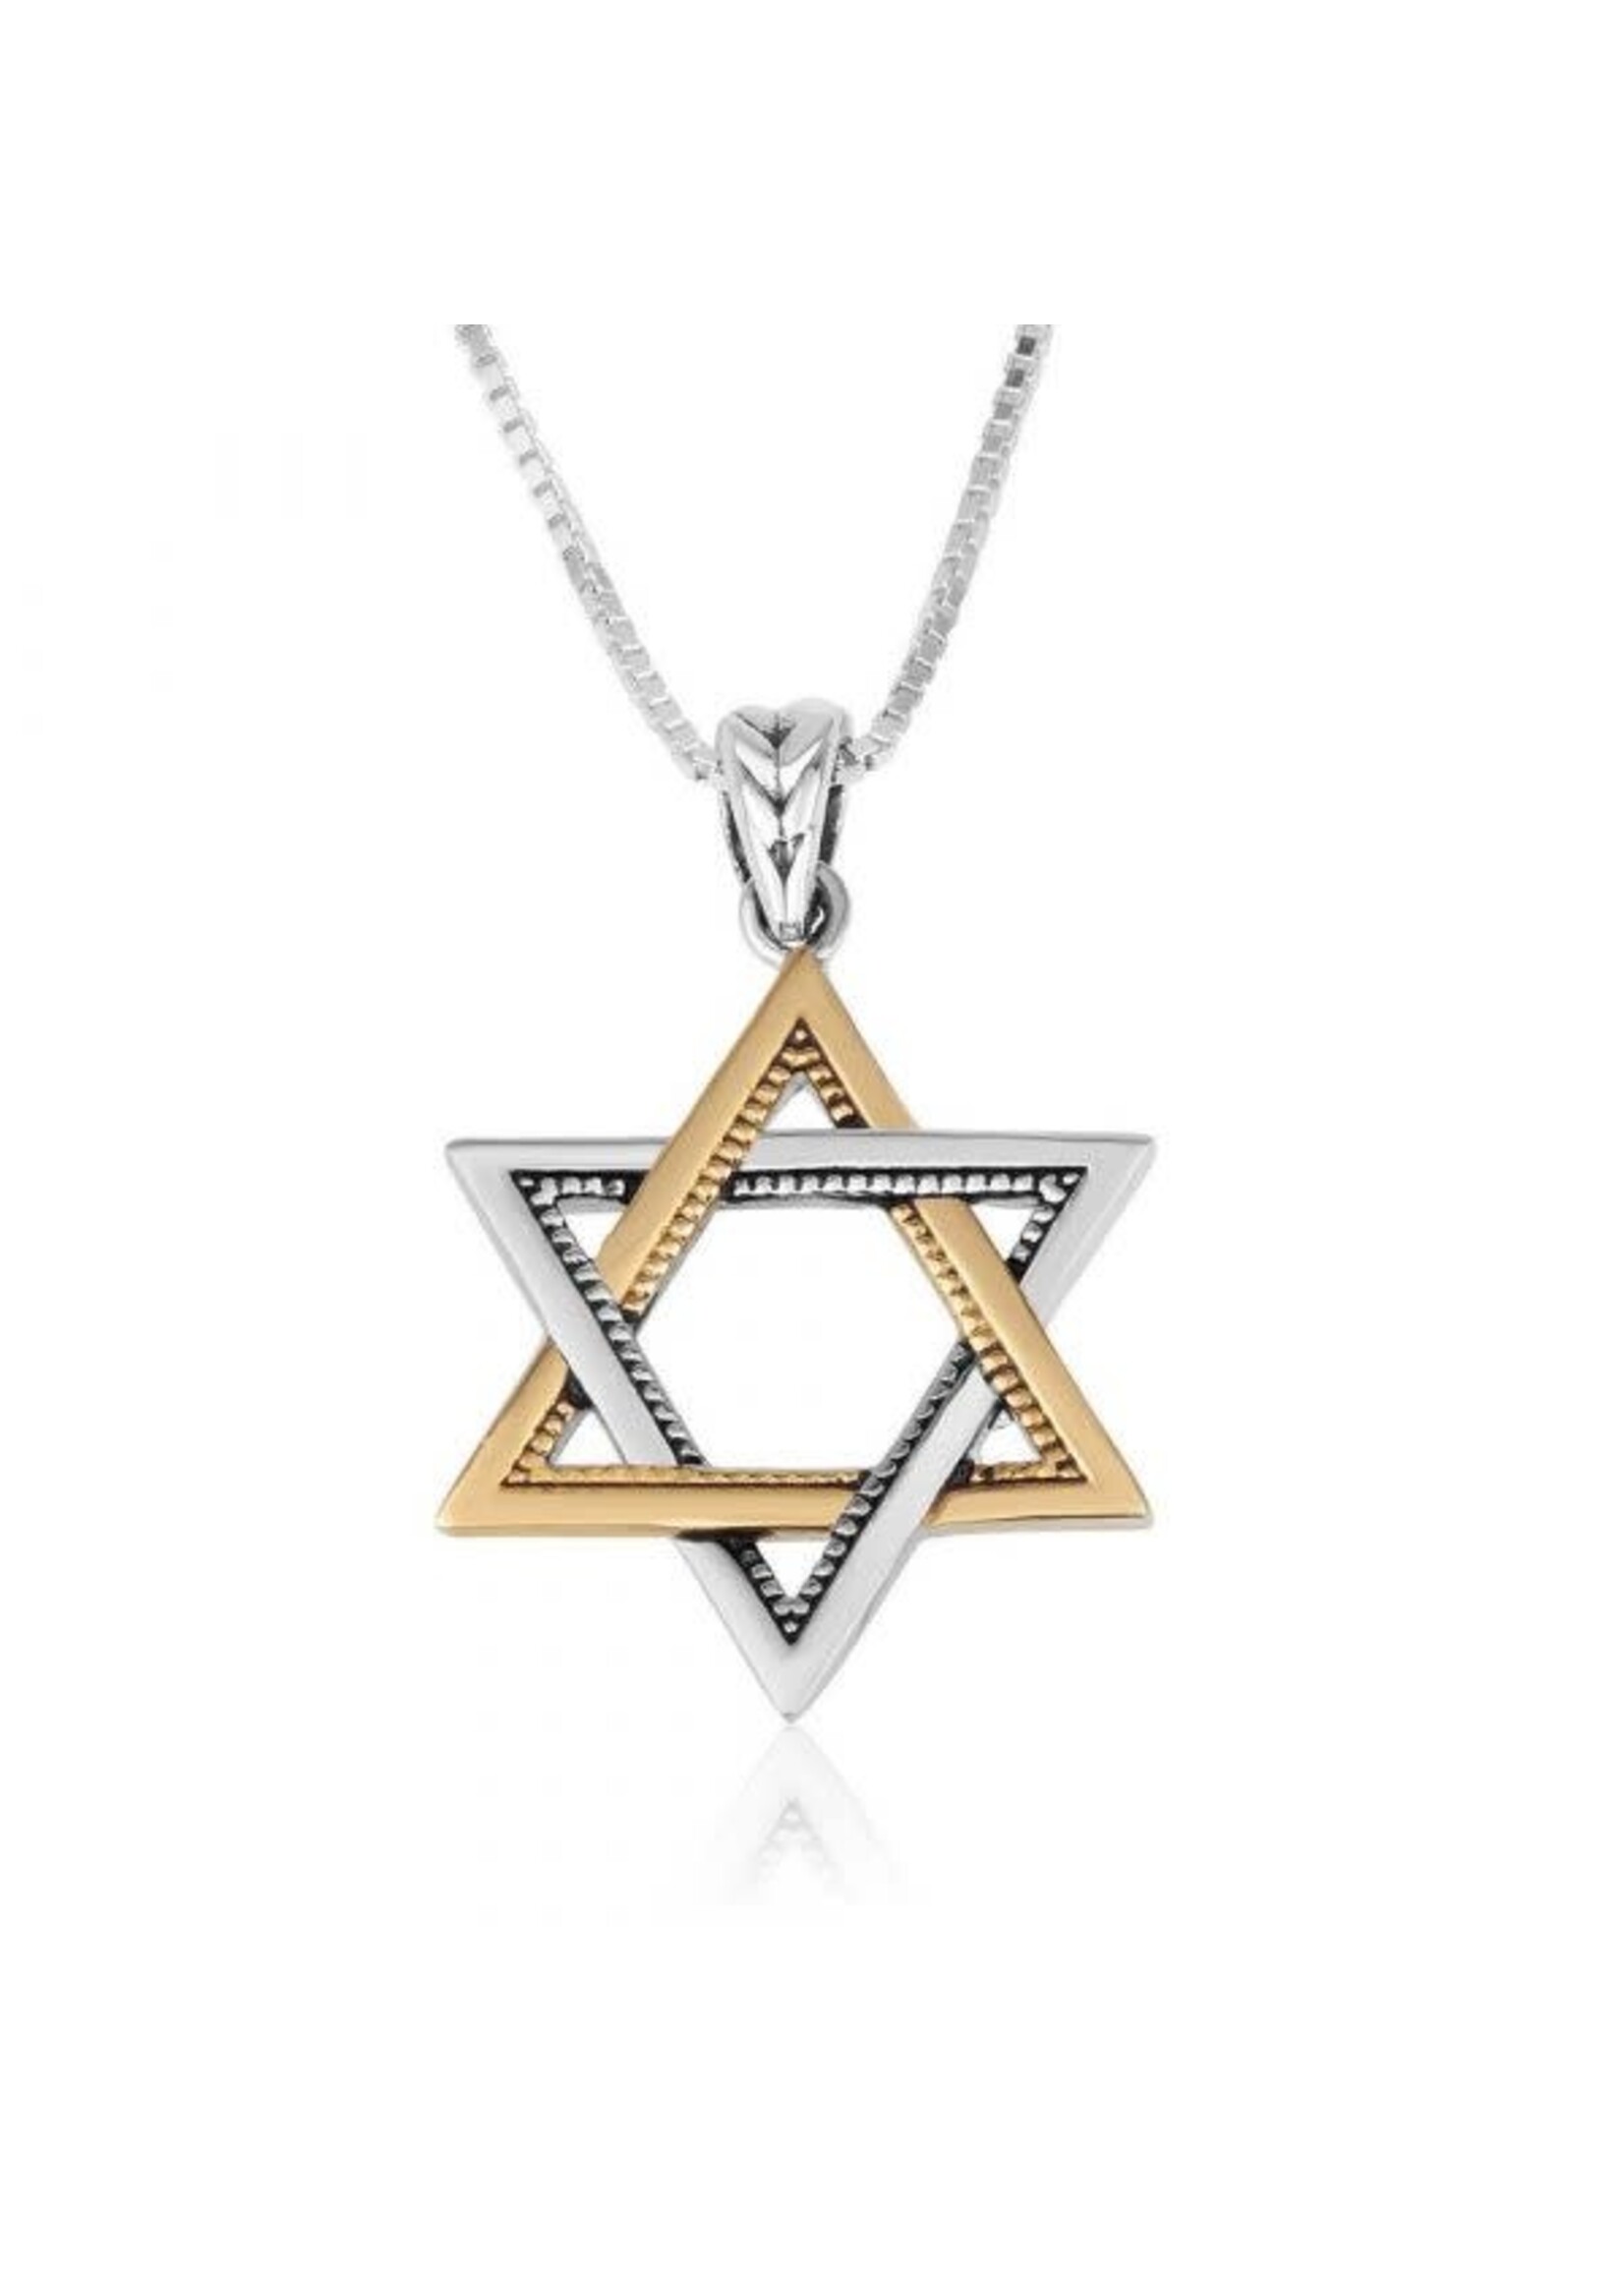 NECKLACE STERLING SILVER AND GOLD POLISH MAGUEN DAVID